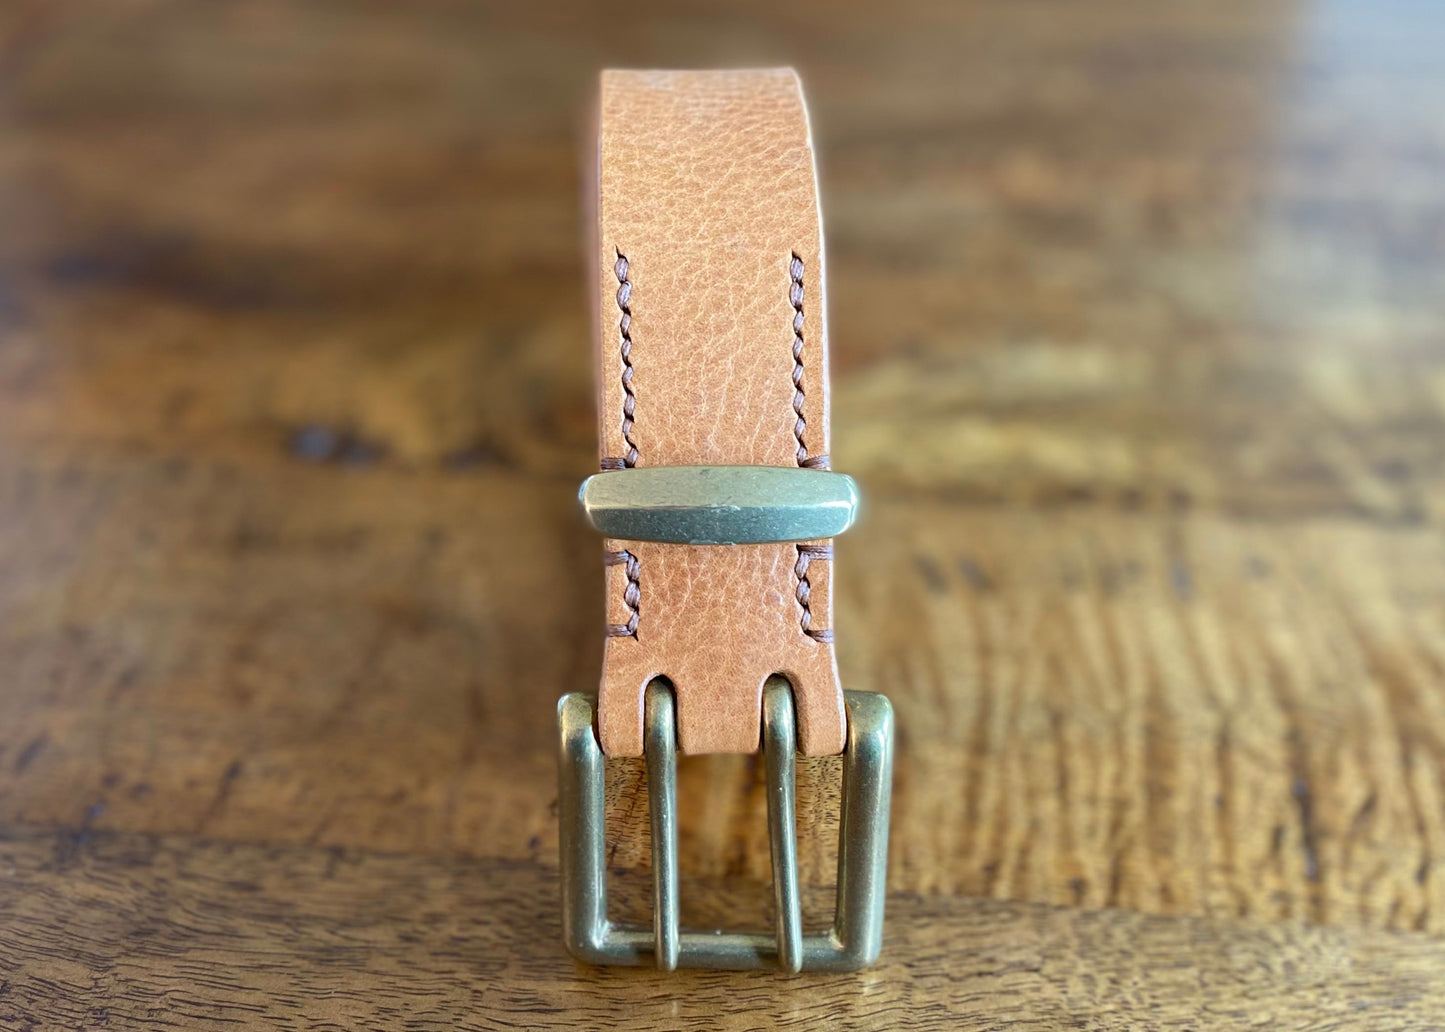 Tan Leather Belt - 2 prong Brass buckle - 1.5" (38mm wide) - Full Grain Leather - Hand Stitched